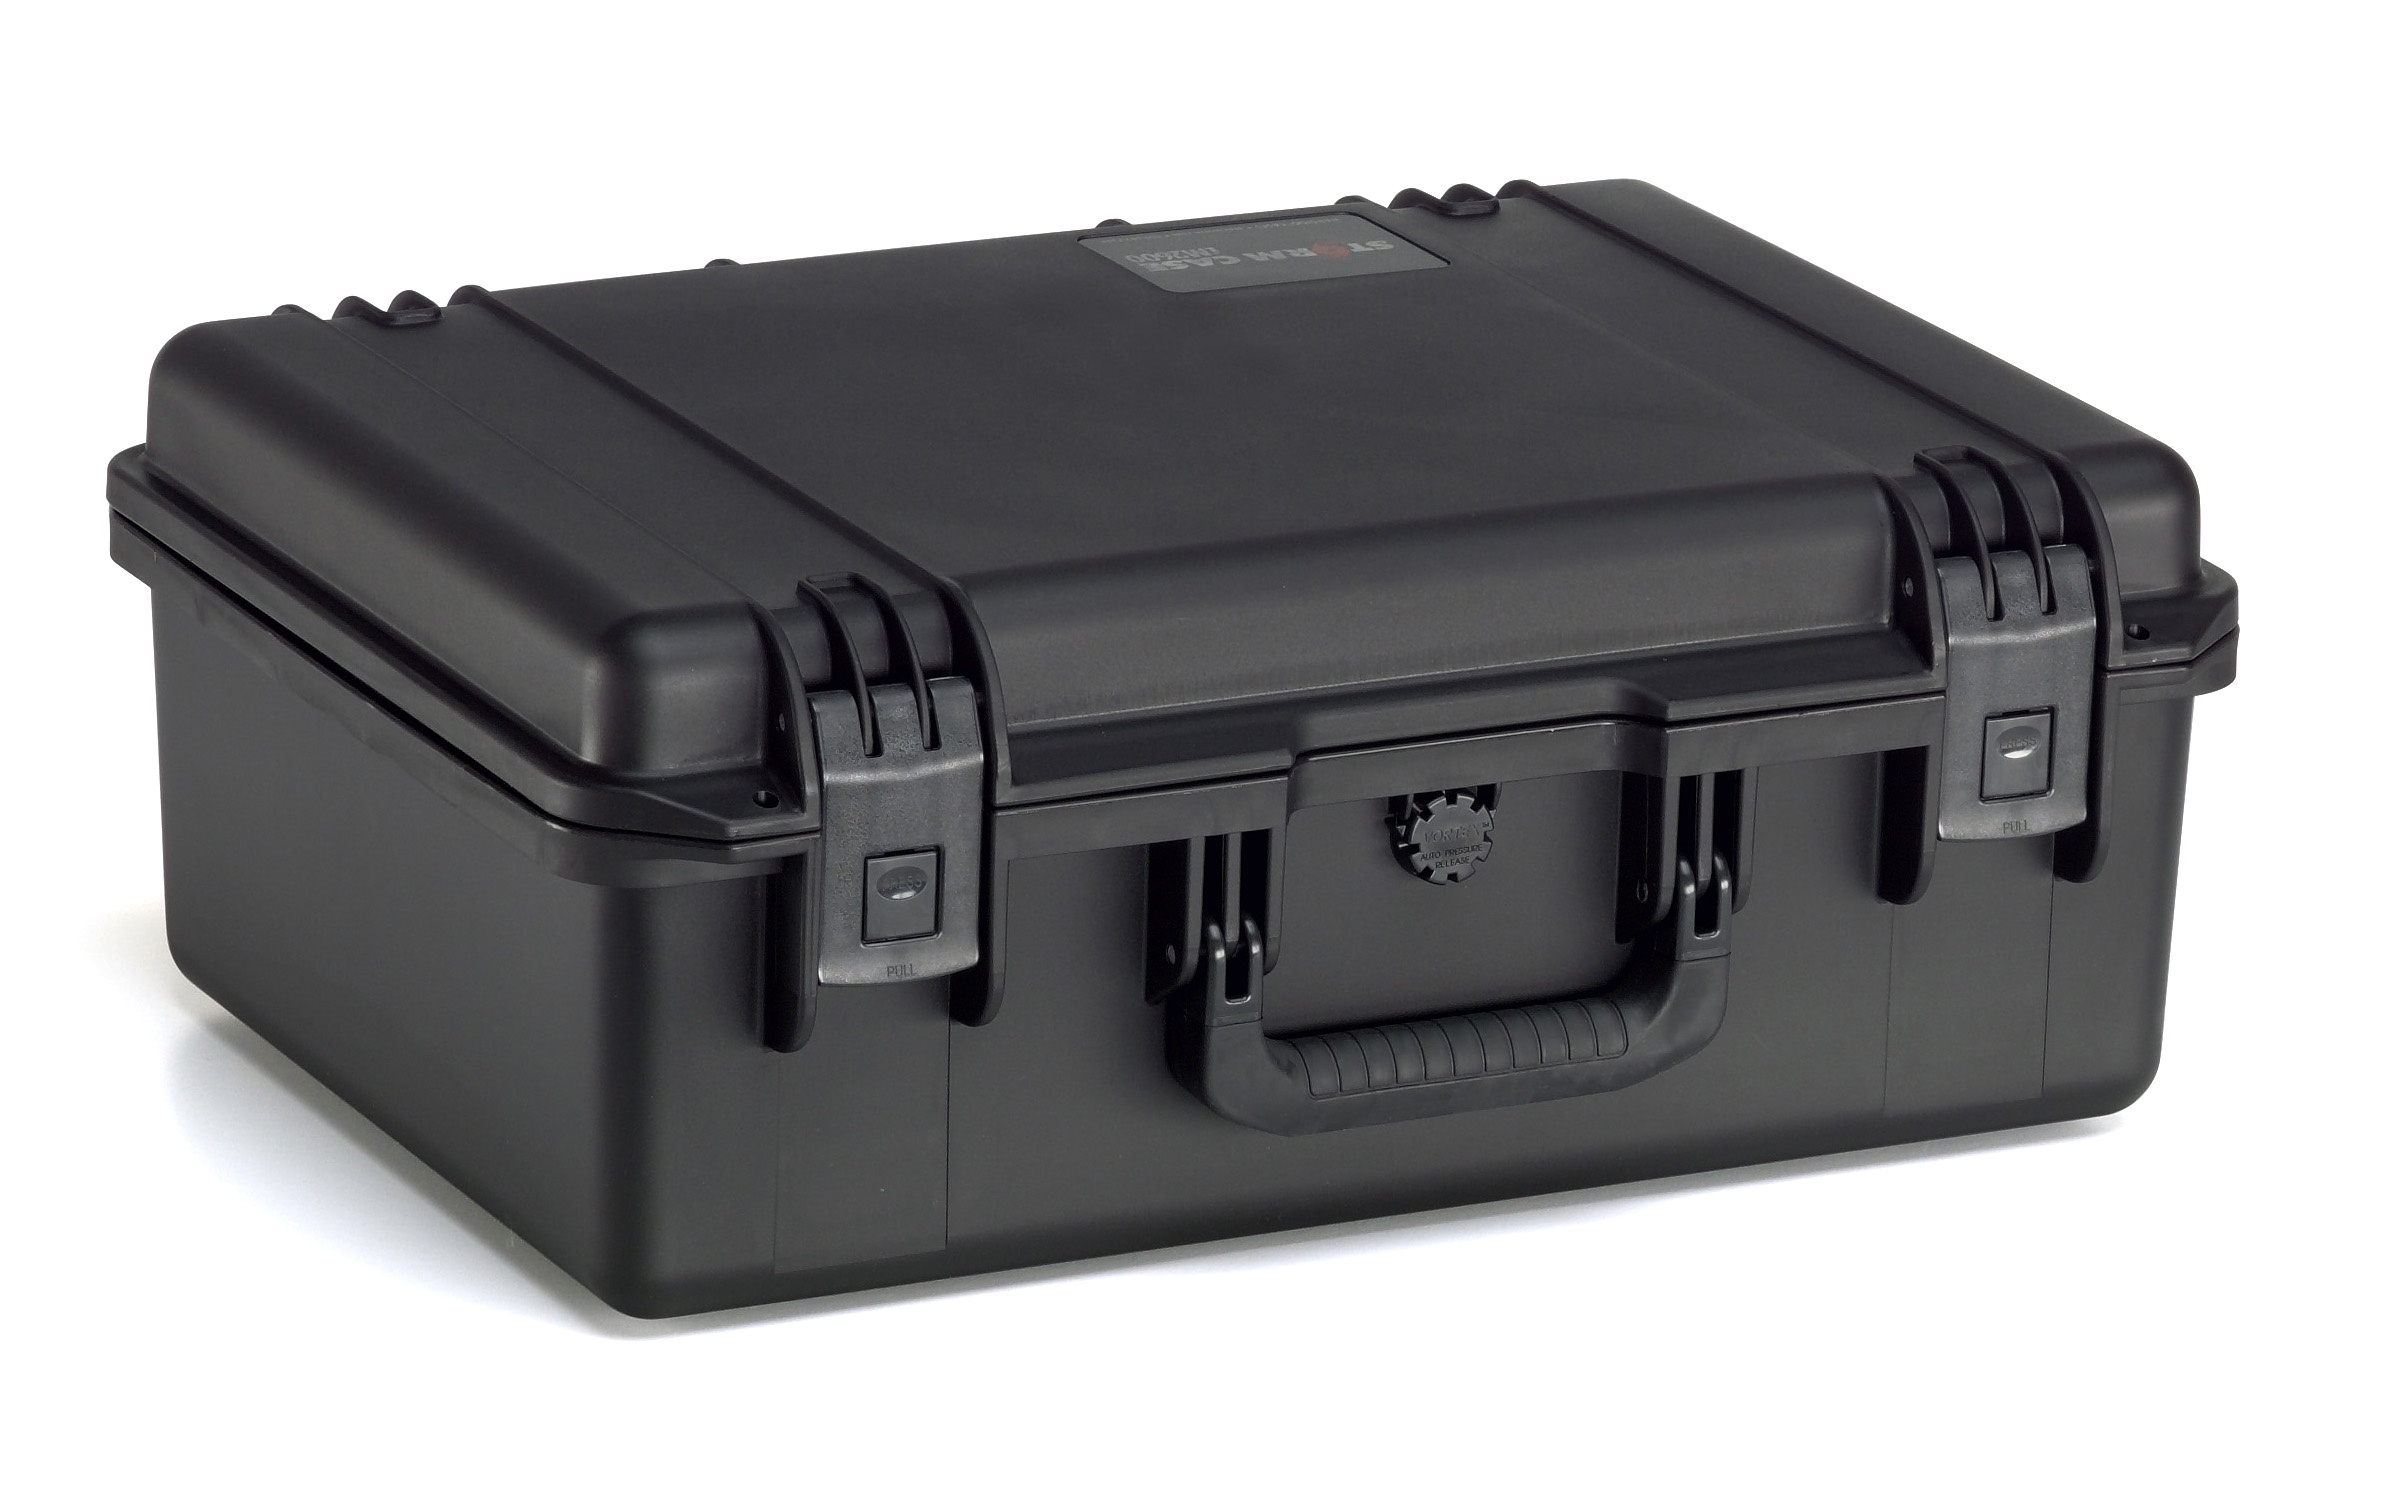 Pelican iM2600 Storm Case with Dividers (Black)